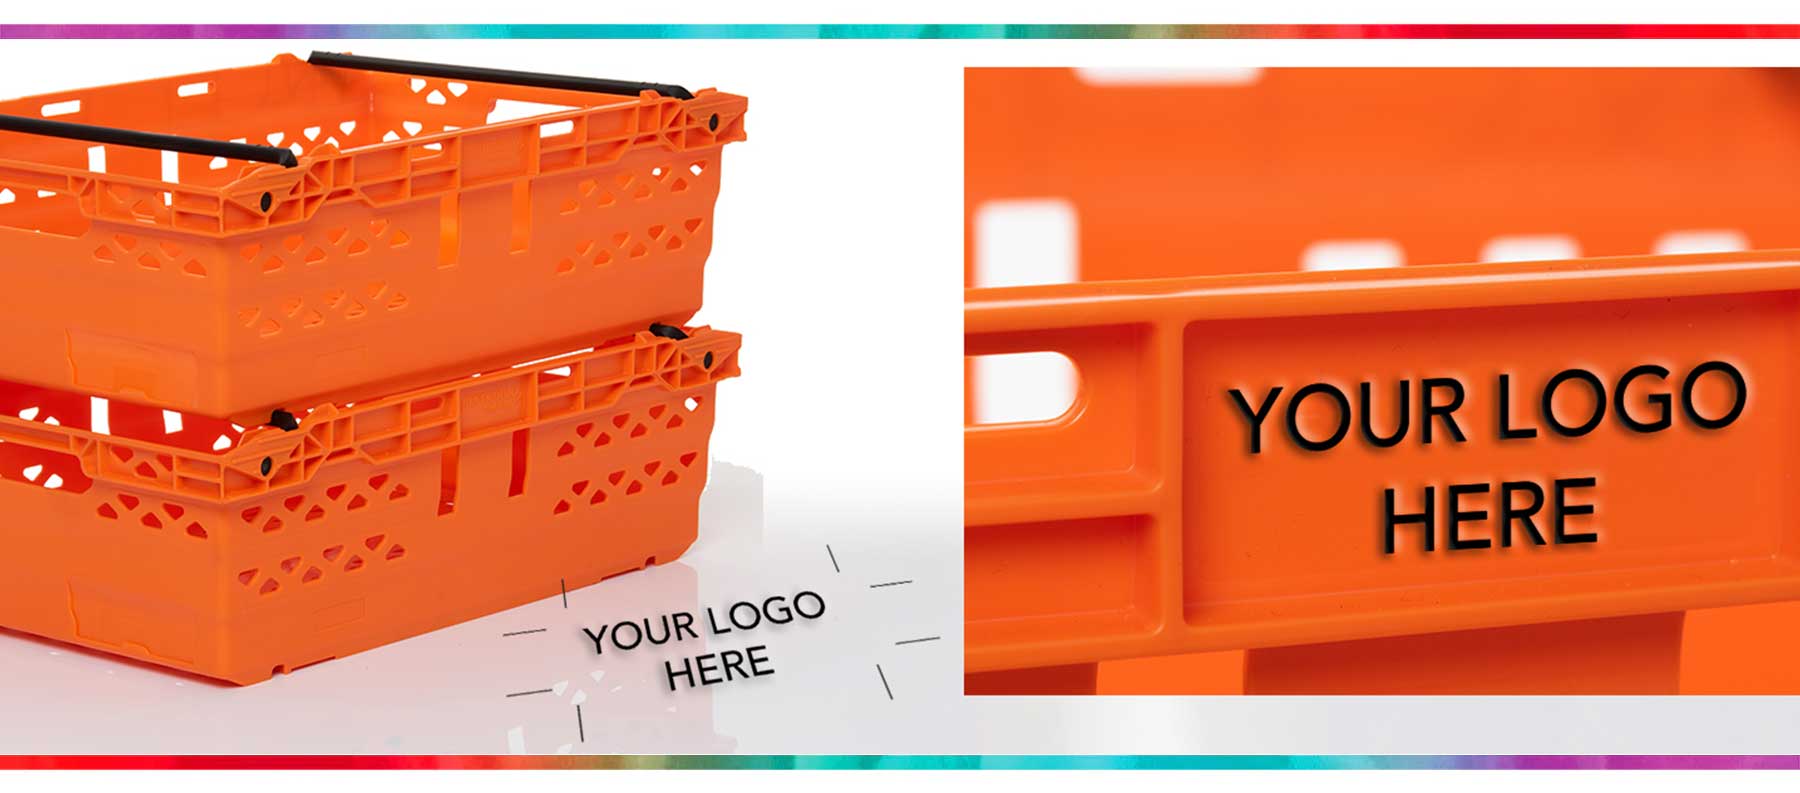 Did you know that we can put wording onto Mailbox products?